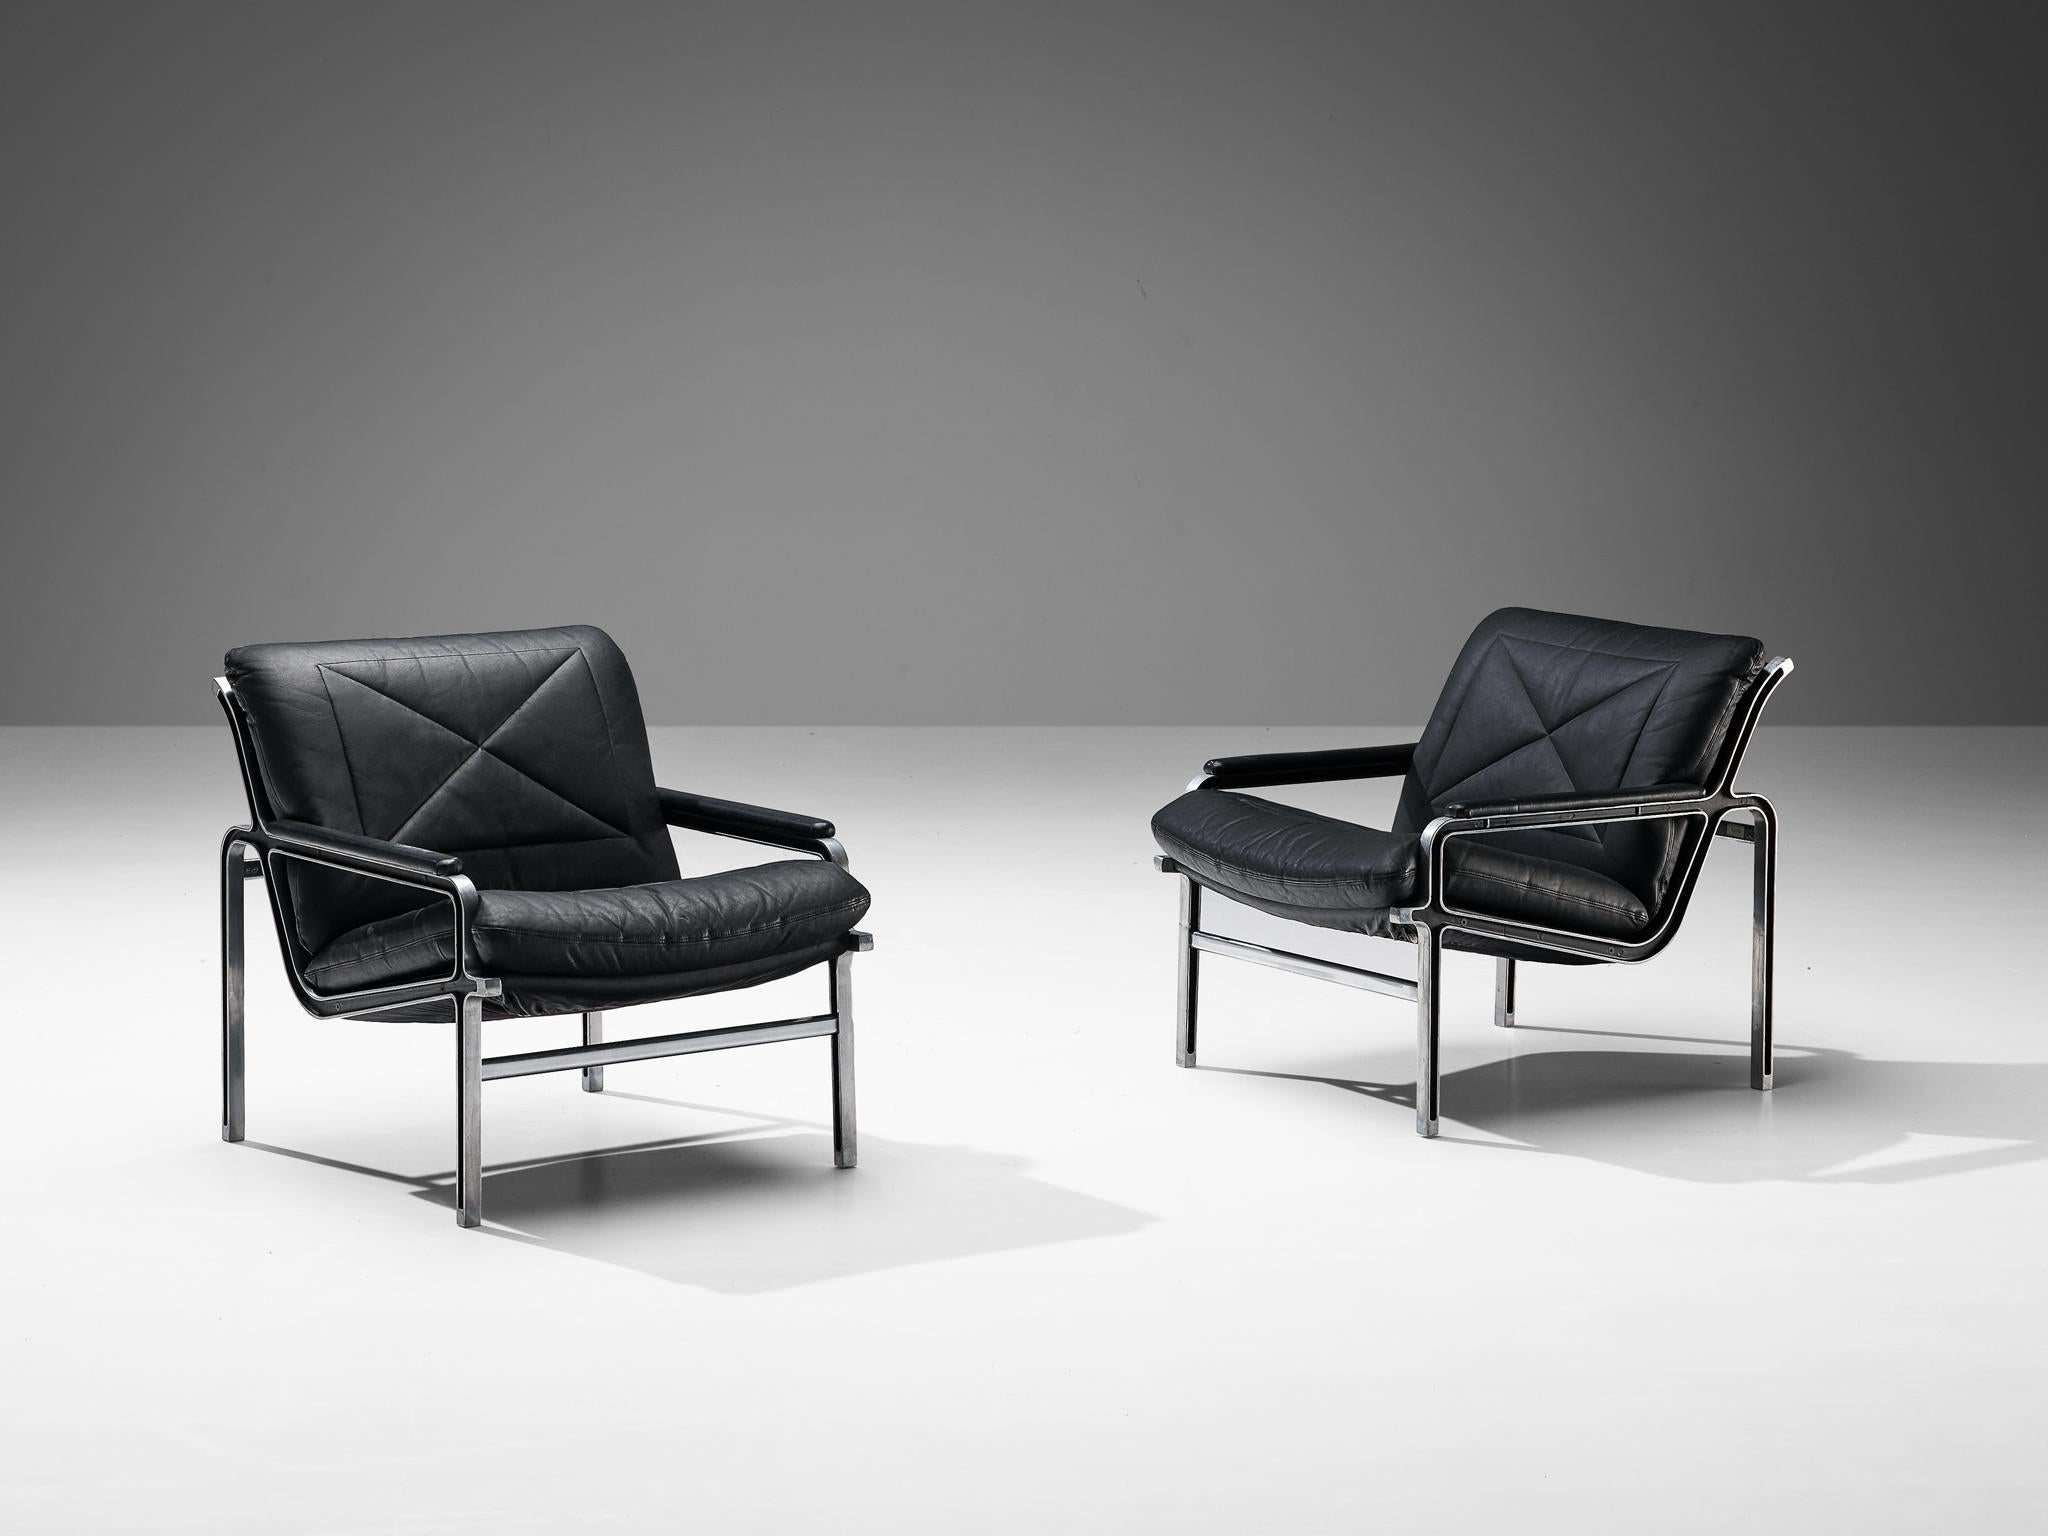 Andre Vandenbeuck for Strässle, pair of 'Aluline' easy chairs, metal, black leather, Switzerland, 1960s

These well-designed 'Aluline' easy chairs are designed by Andre Vandenbeuck for Swiss manufacturer Strässle in the 1960s. The appearance of